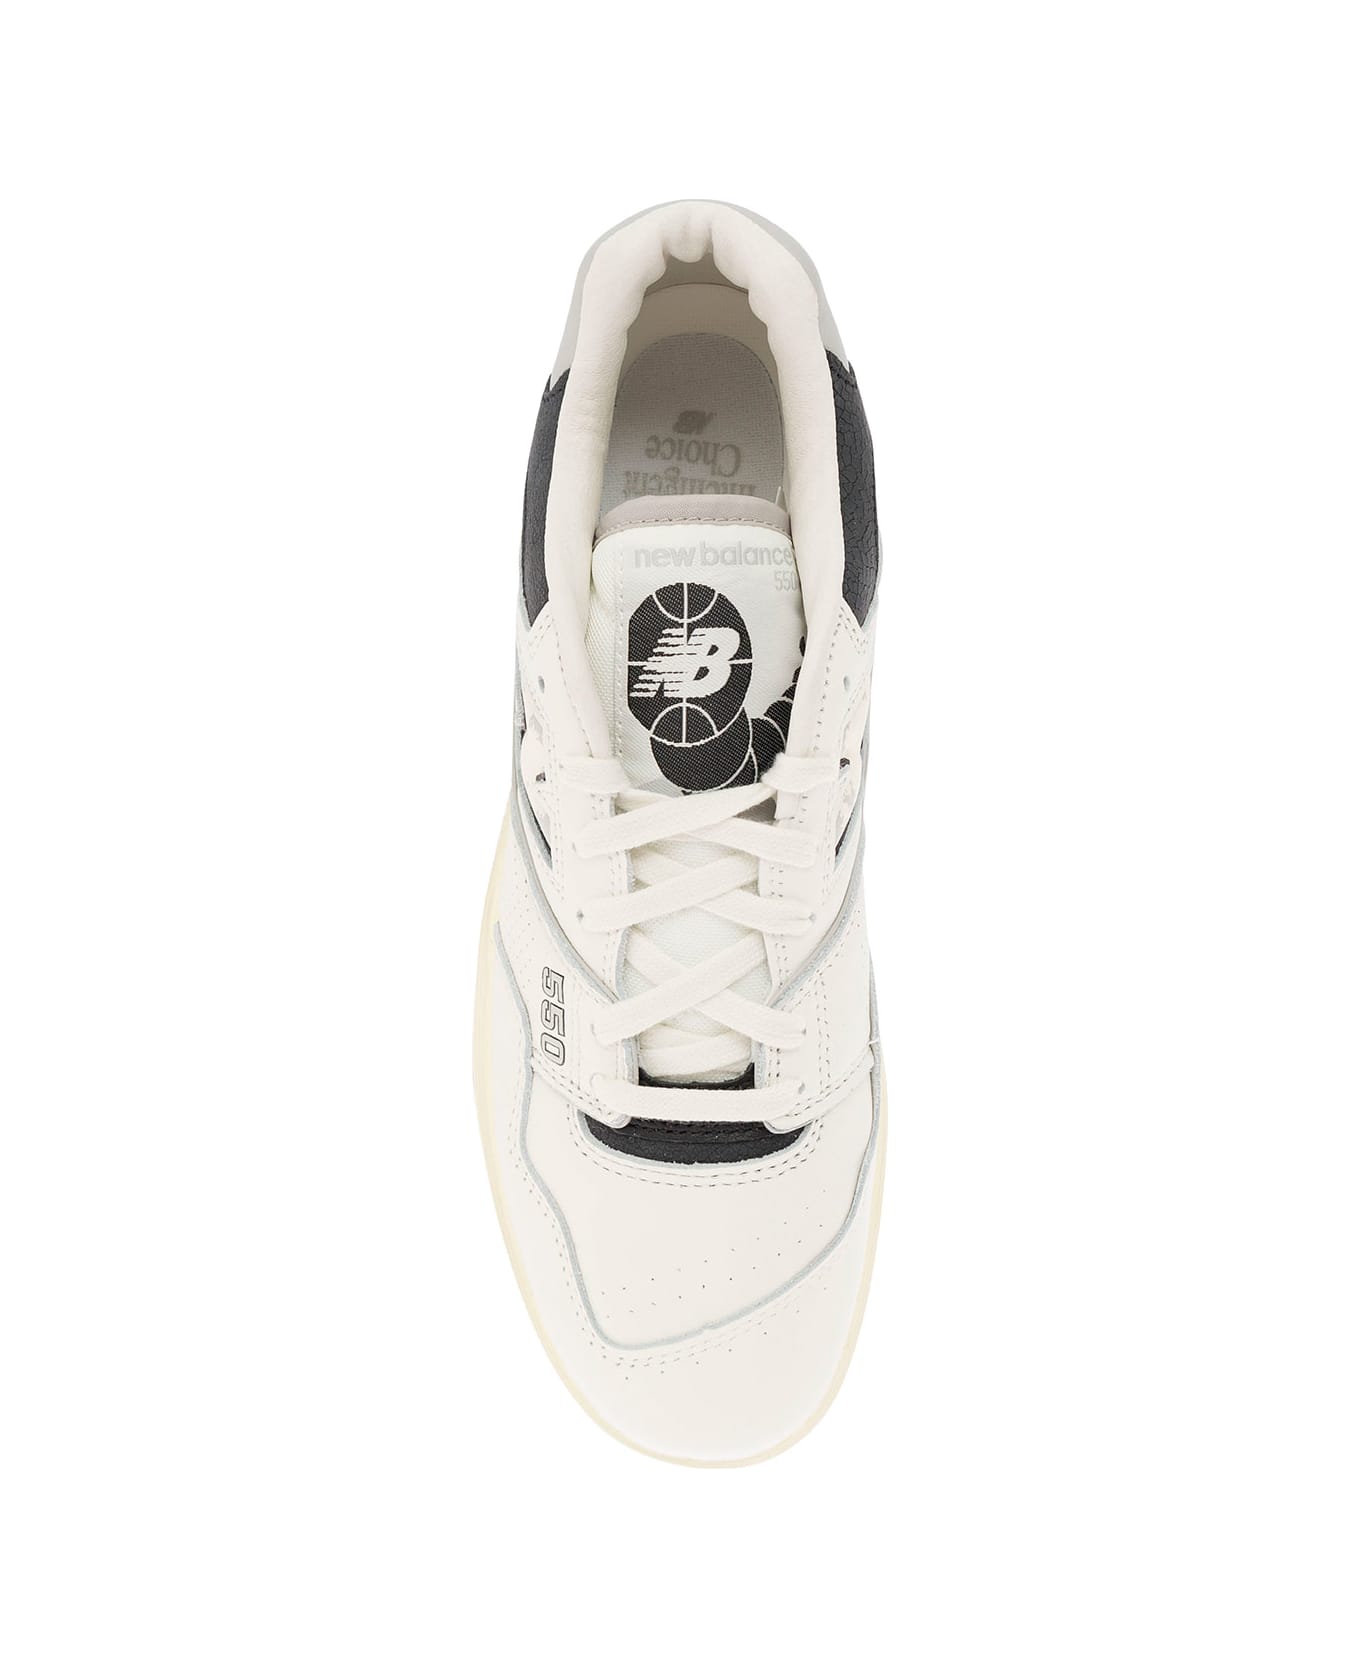 New Balance '550' White And Grey Low Top Sneakers With Logo And Contrasting Details In Leather Man - Grey